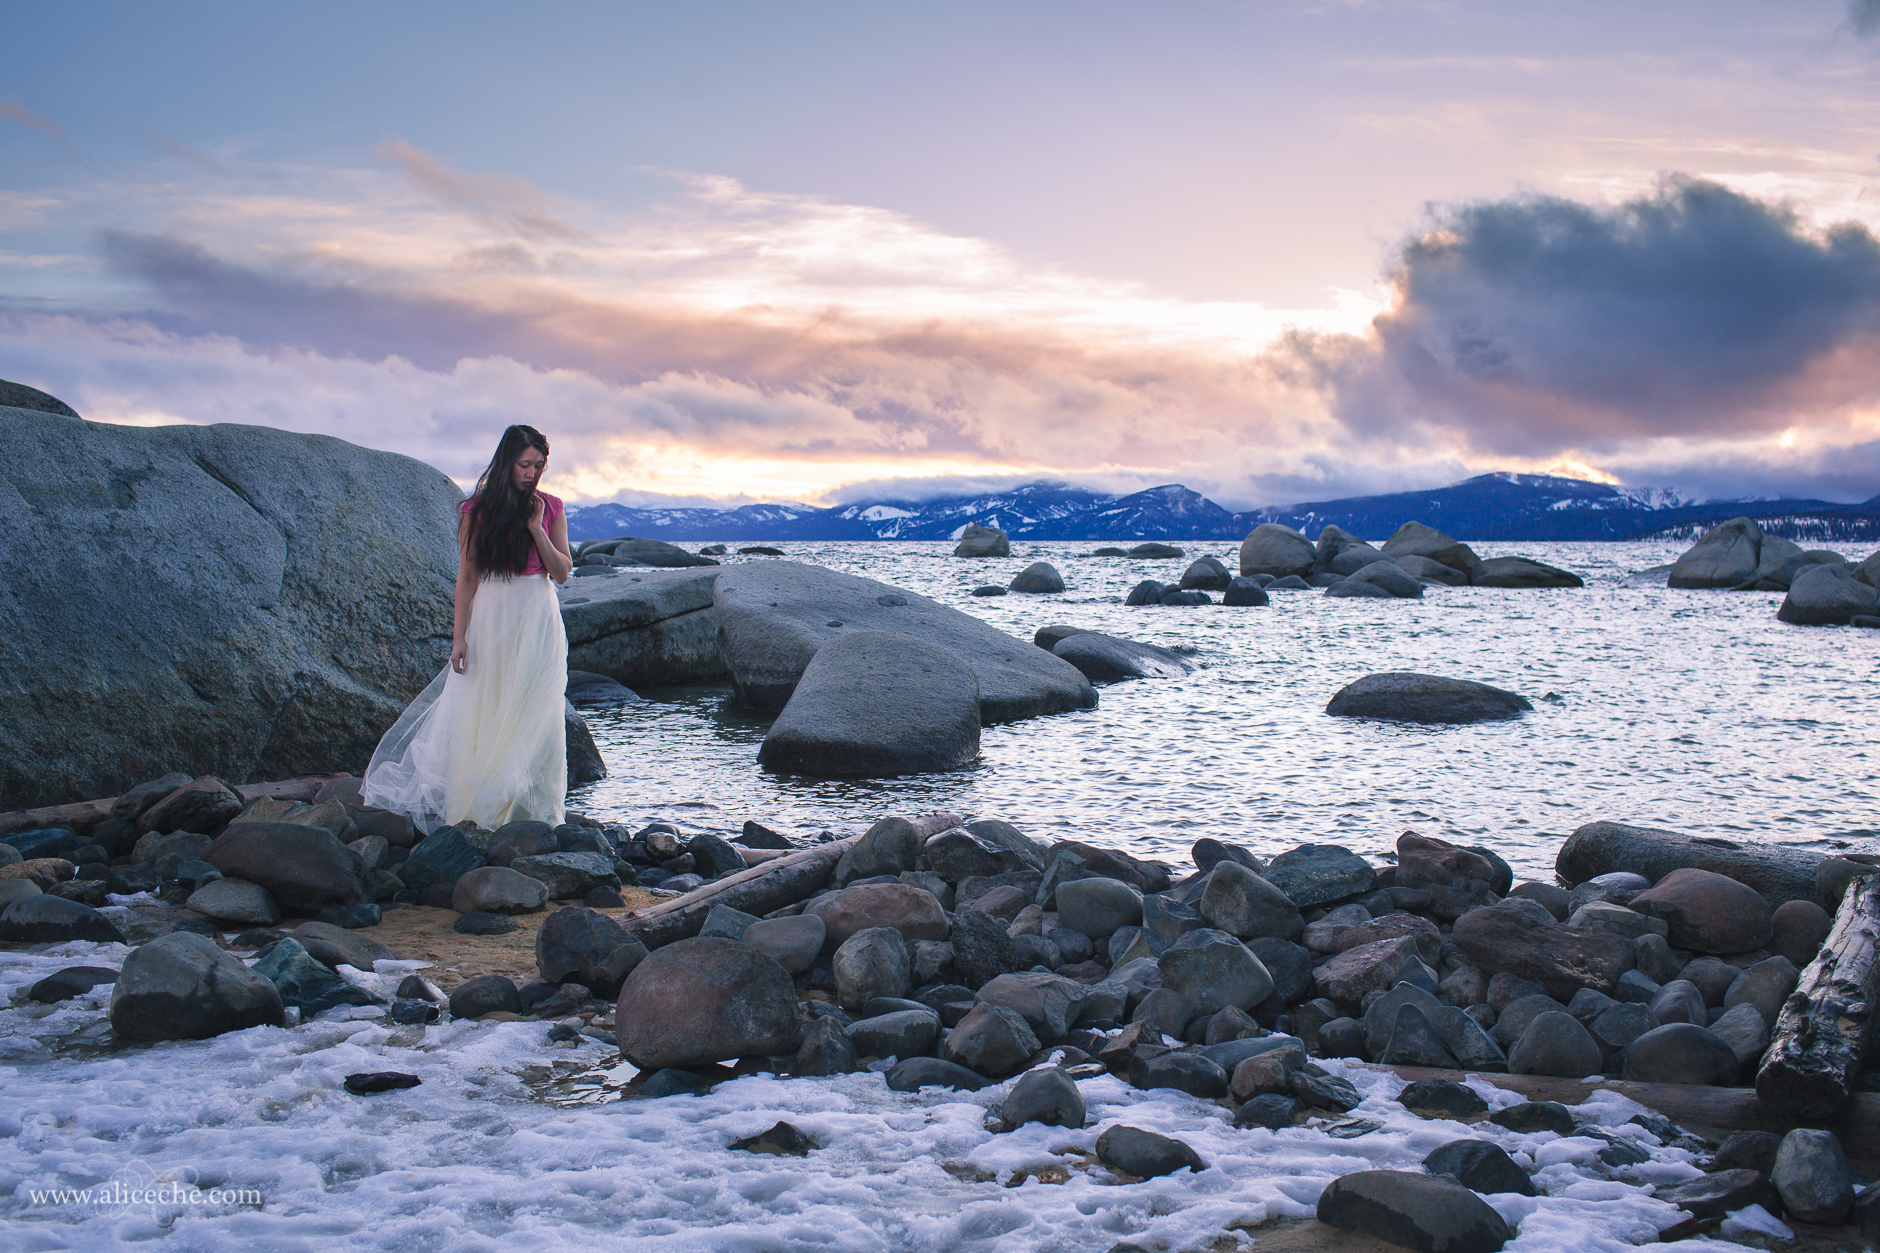 alice-che-photography-lake-tahoe-self-portrait-sunset-movement-tulle-skirt-snow-2